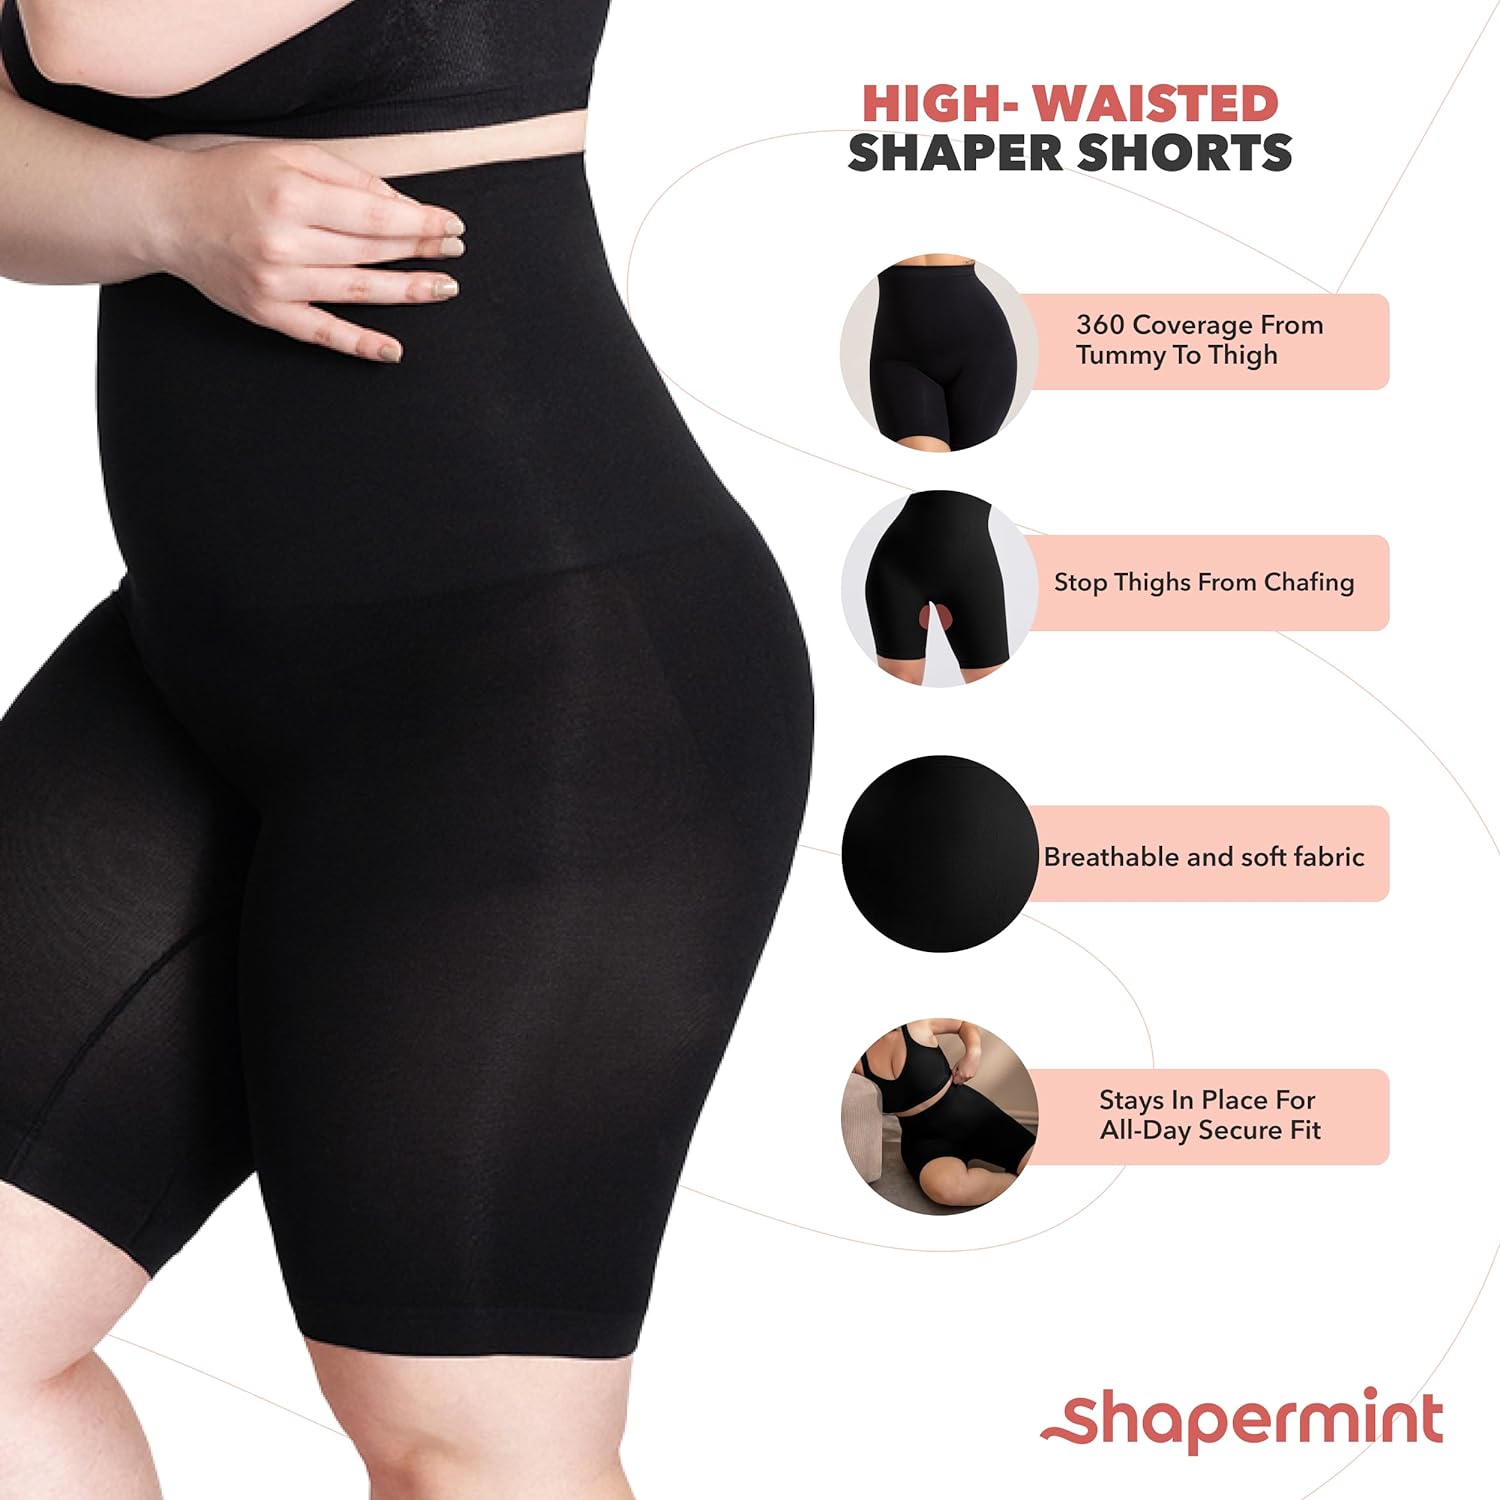 Shapermint Women’s All Day Every Day High Waisted Shaper Shorts - image 4 of 7